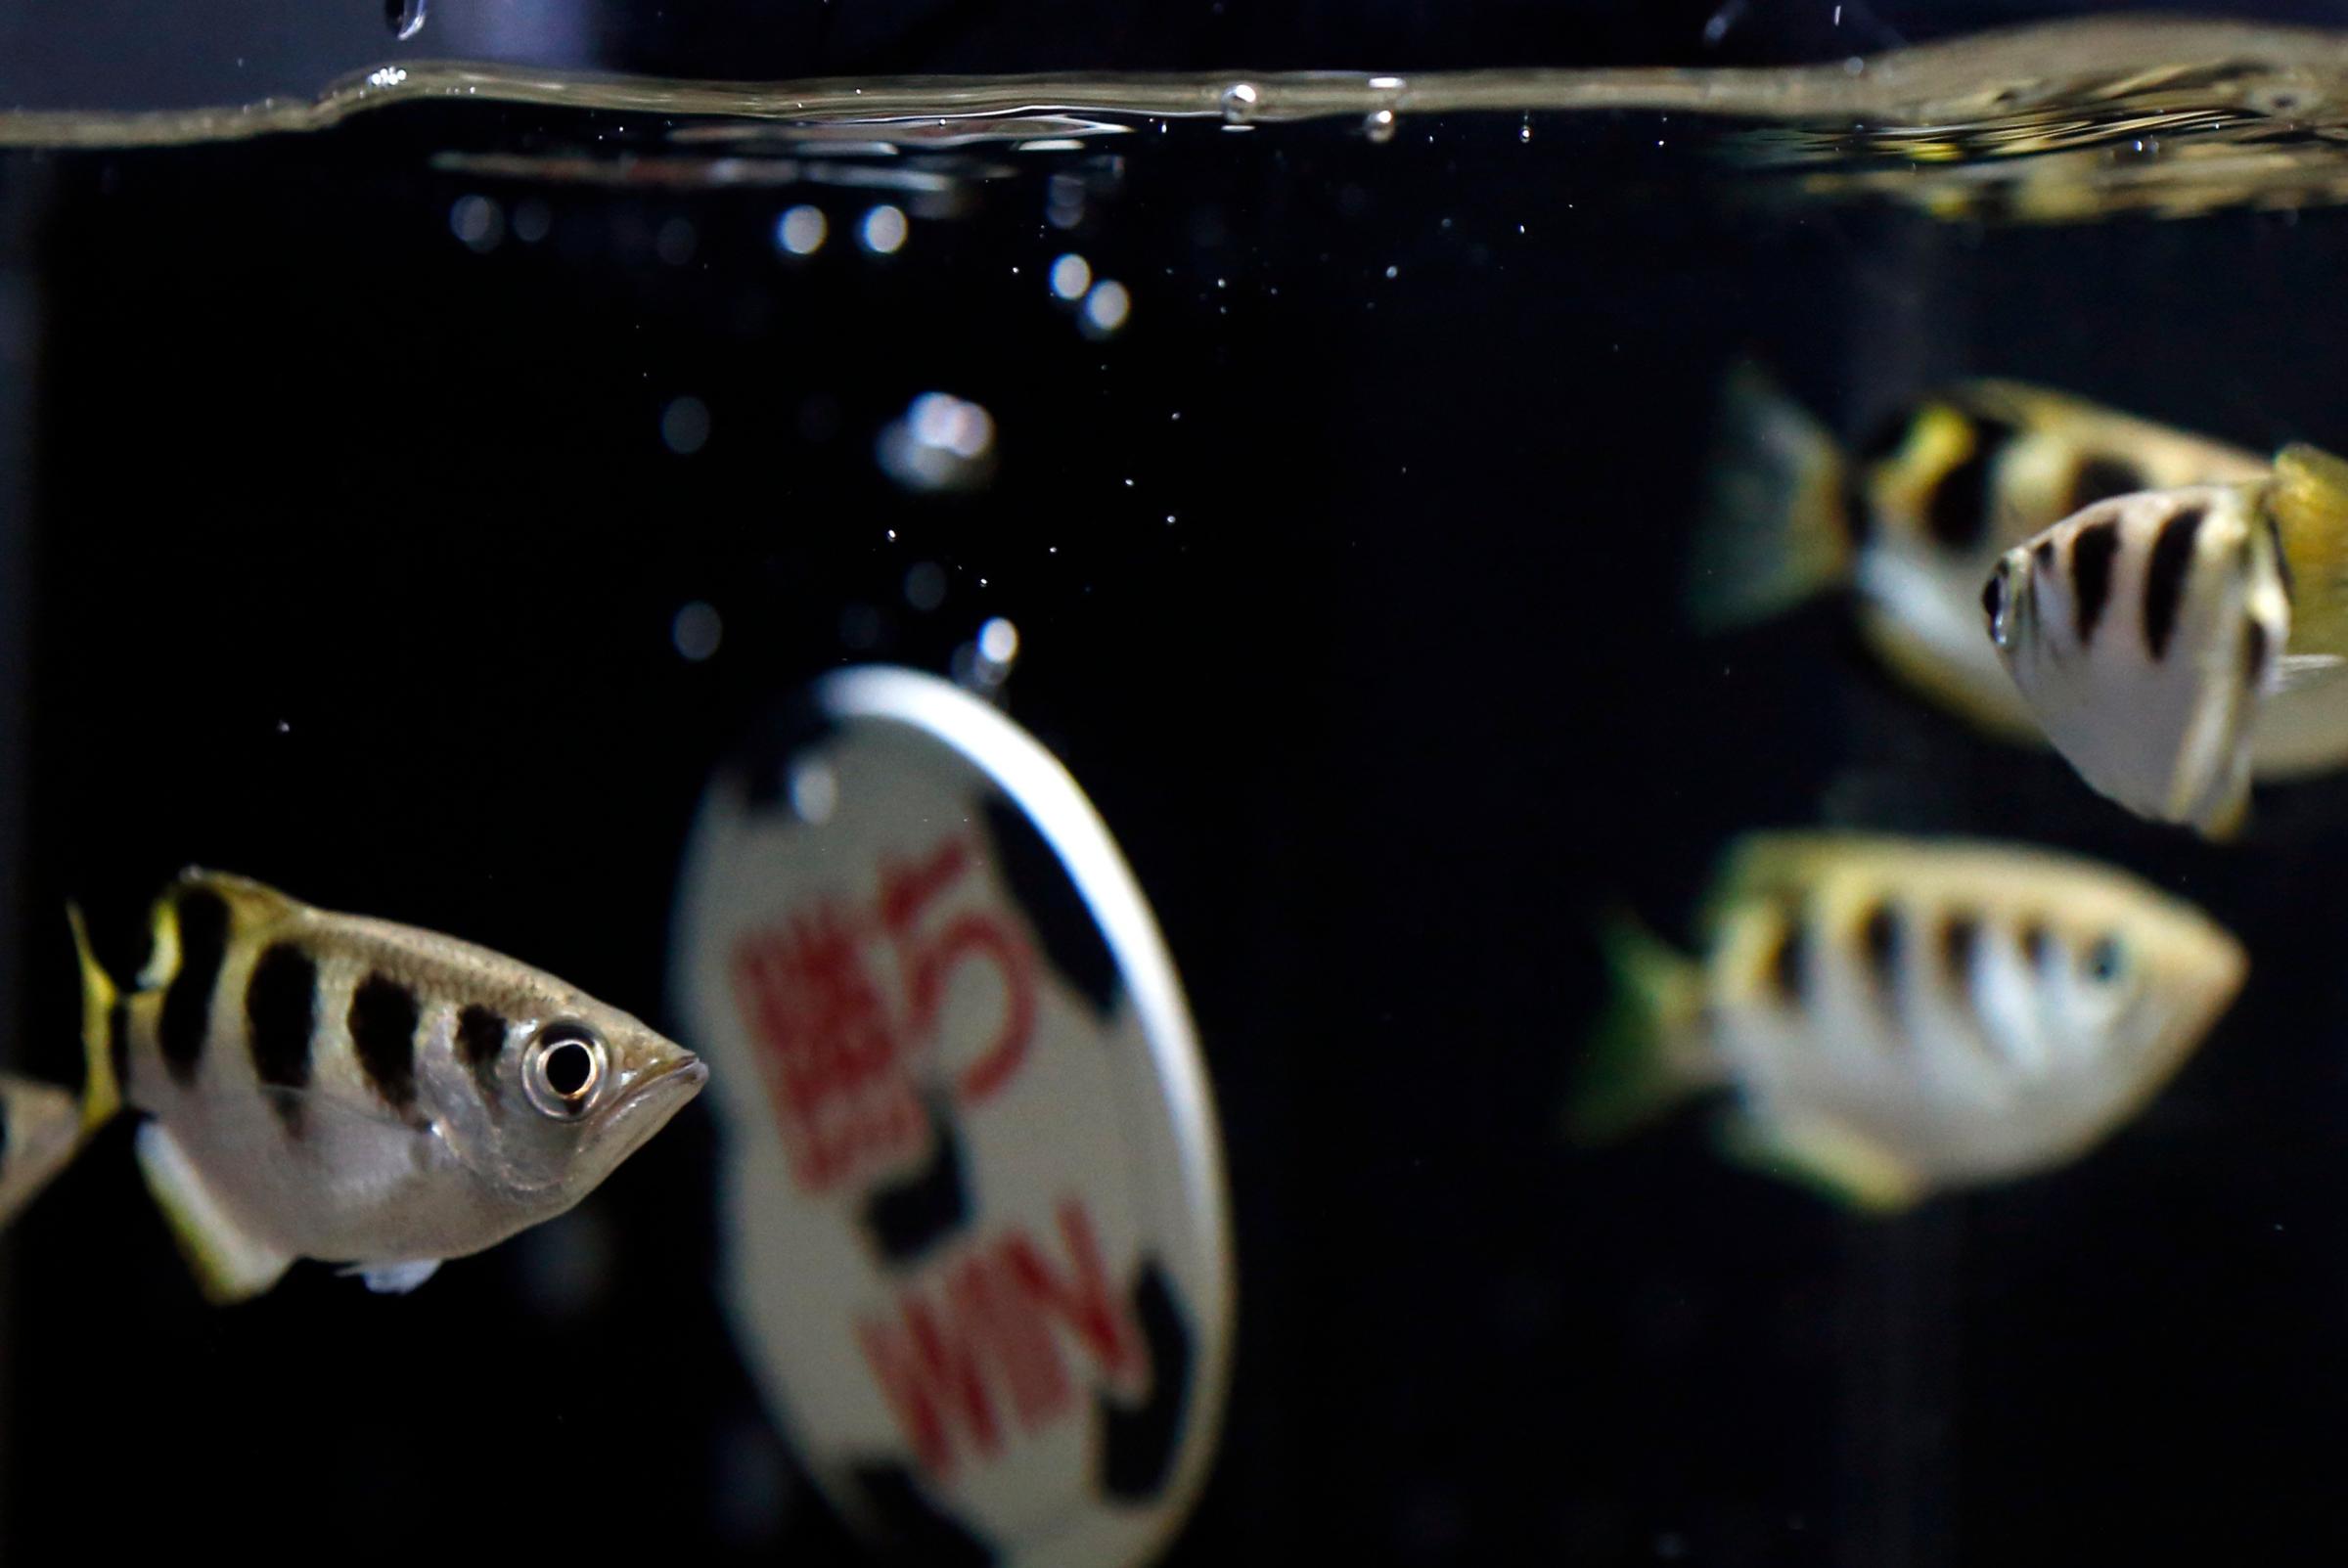 Archerfish predict Japan's victory in their 2014 World Cup soccer match against Ivory Coast by hitting the plate coated with their bait and written with the word "Win", with powerful jets of water shot from their mouths, at Shinagawa Aqua Stadium aquarium in Tokyo on June 13, 2014.